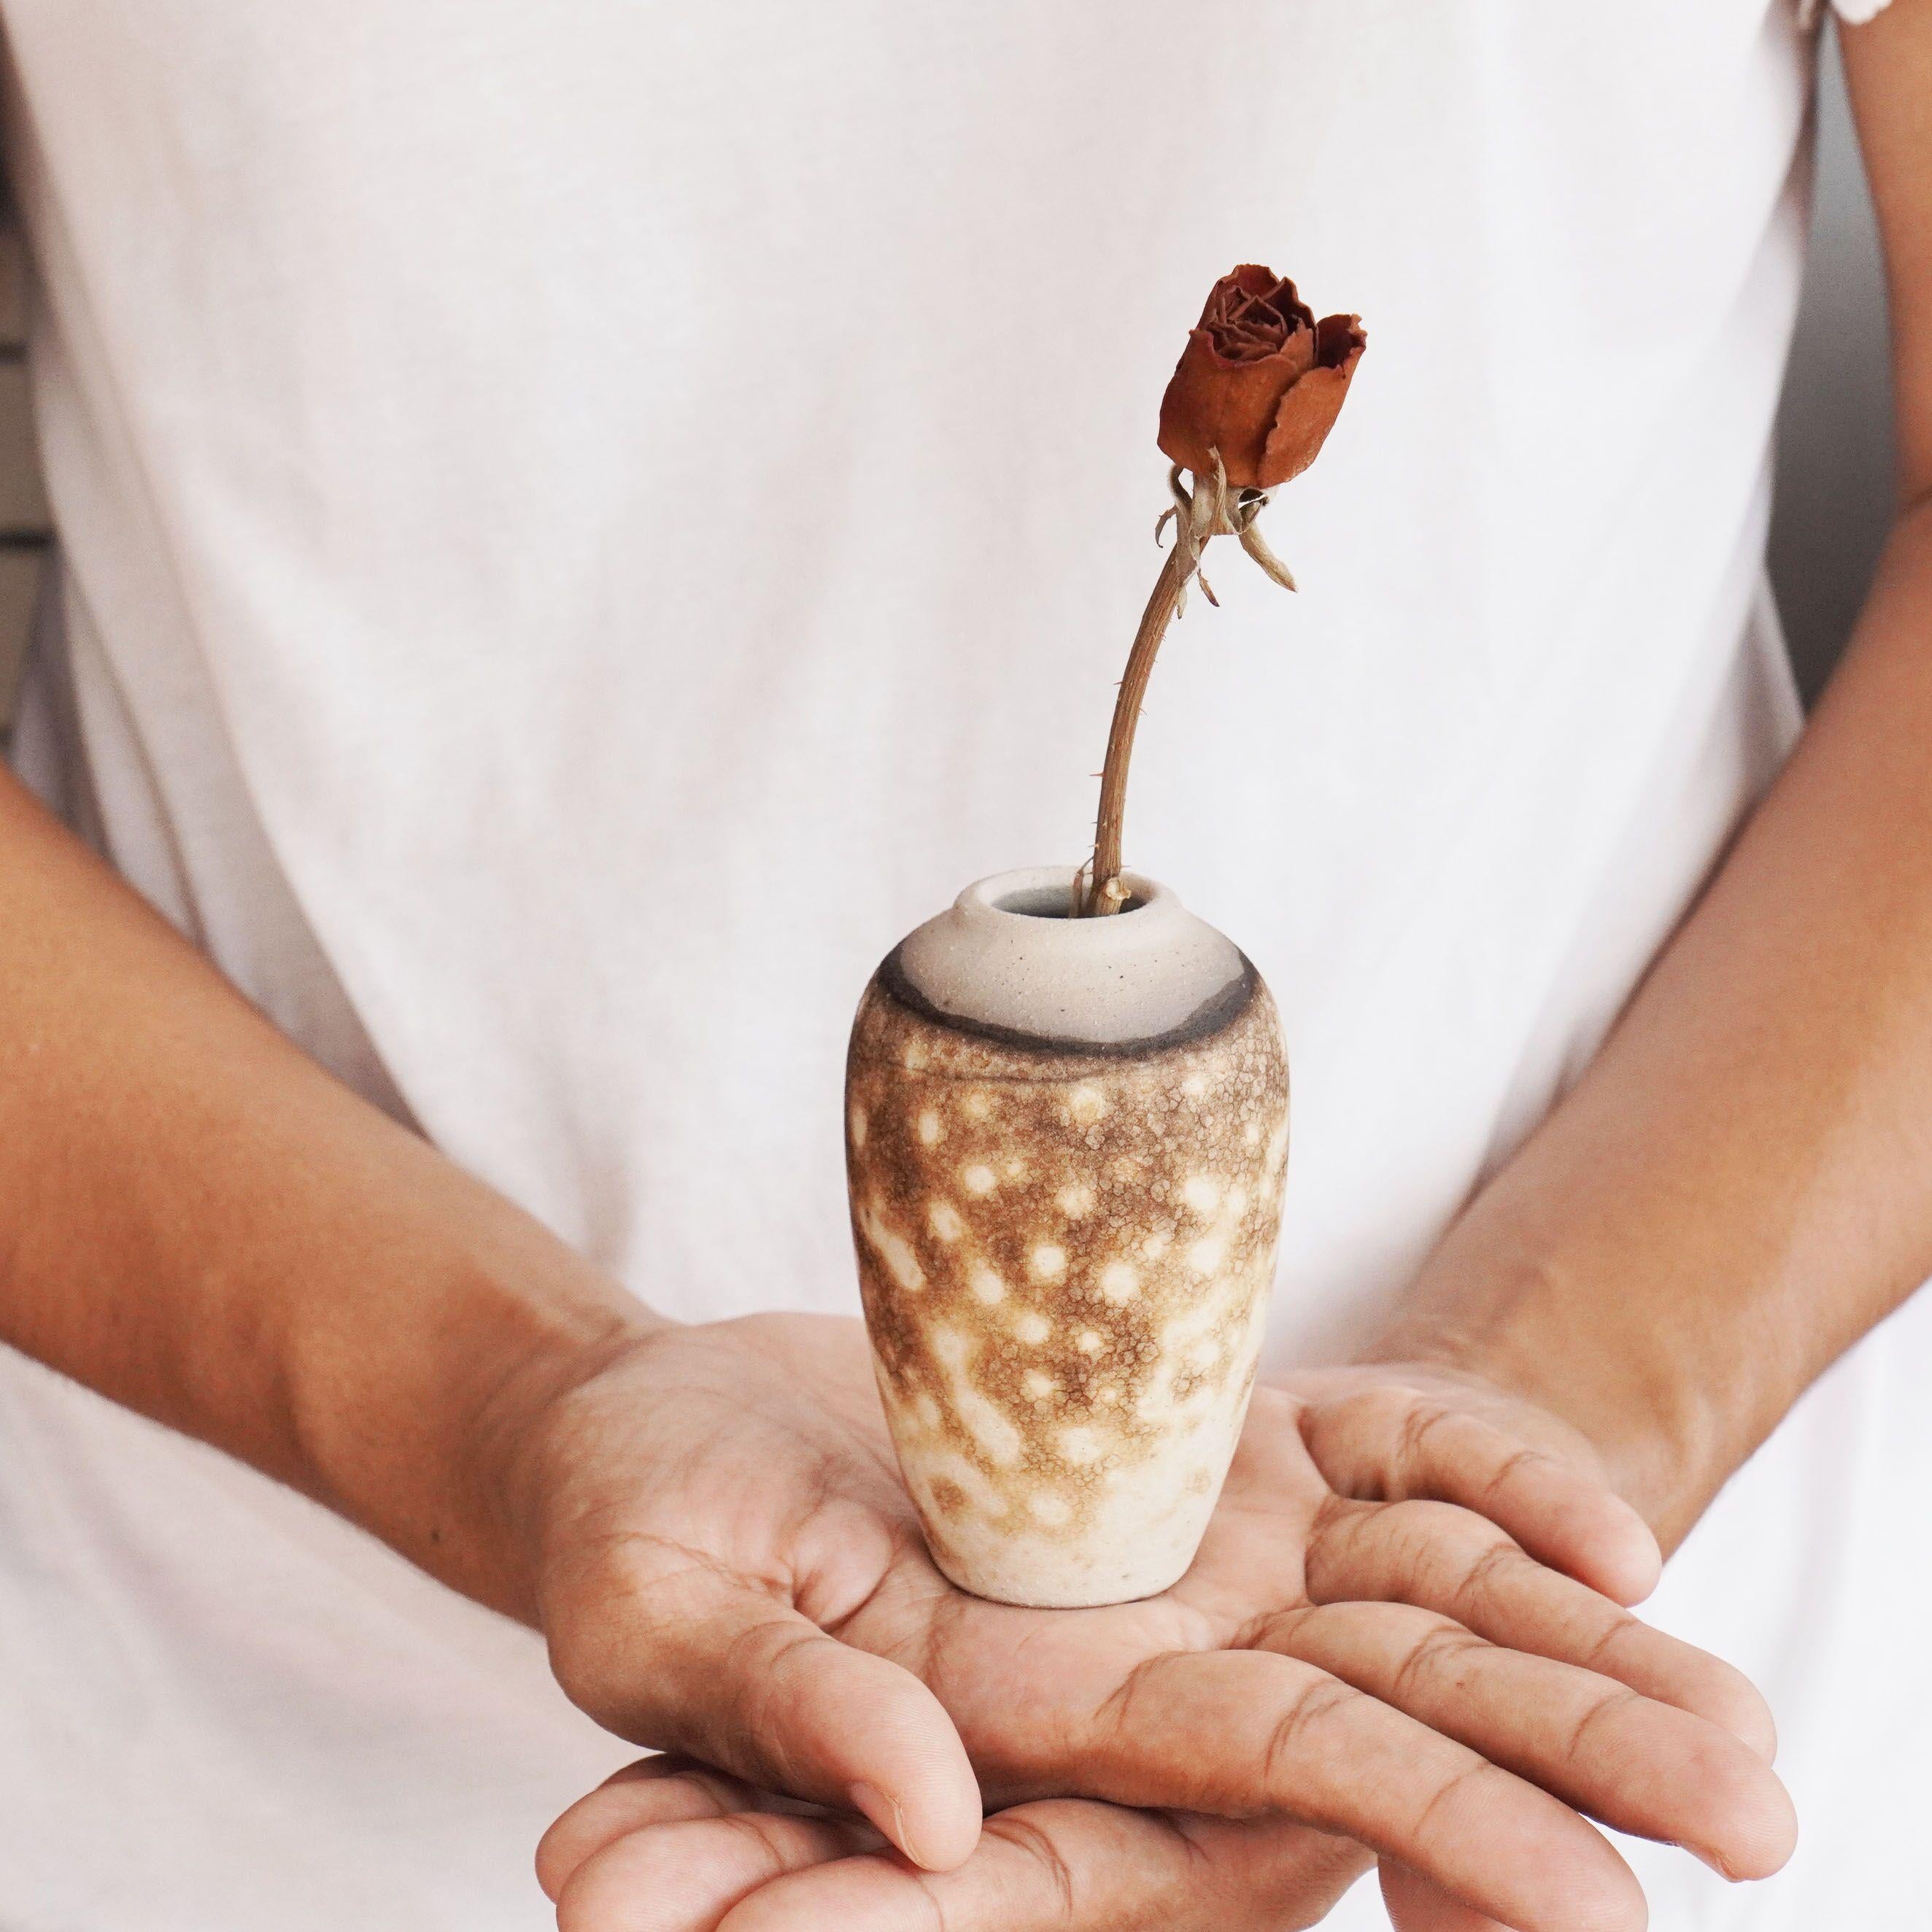 Hana L ~ 花 Flower.

Our Hana L mini raku vase represents a miniature urn with a bulbous top tapers slenderly to a smaller base. This vase makes for an adorable gift or a tabletop decorative piece that truly stands out. Each piece is individually